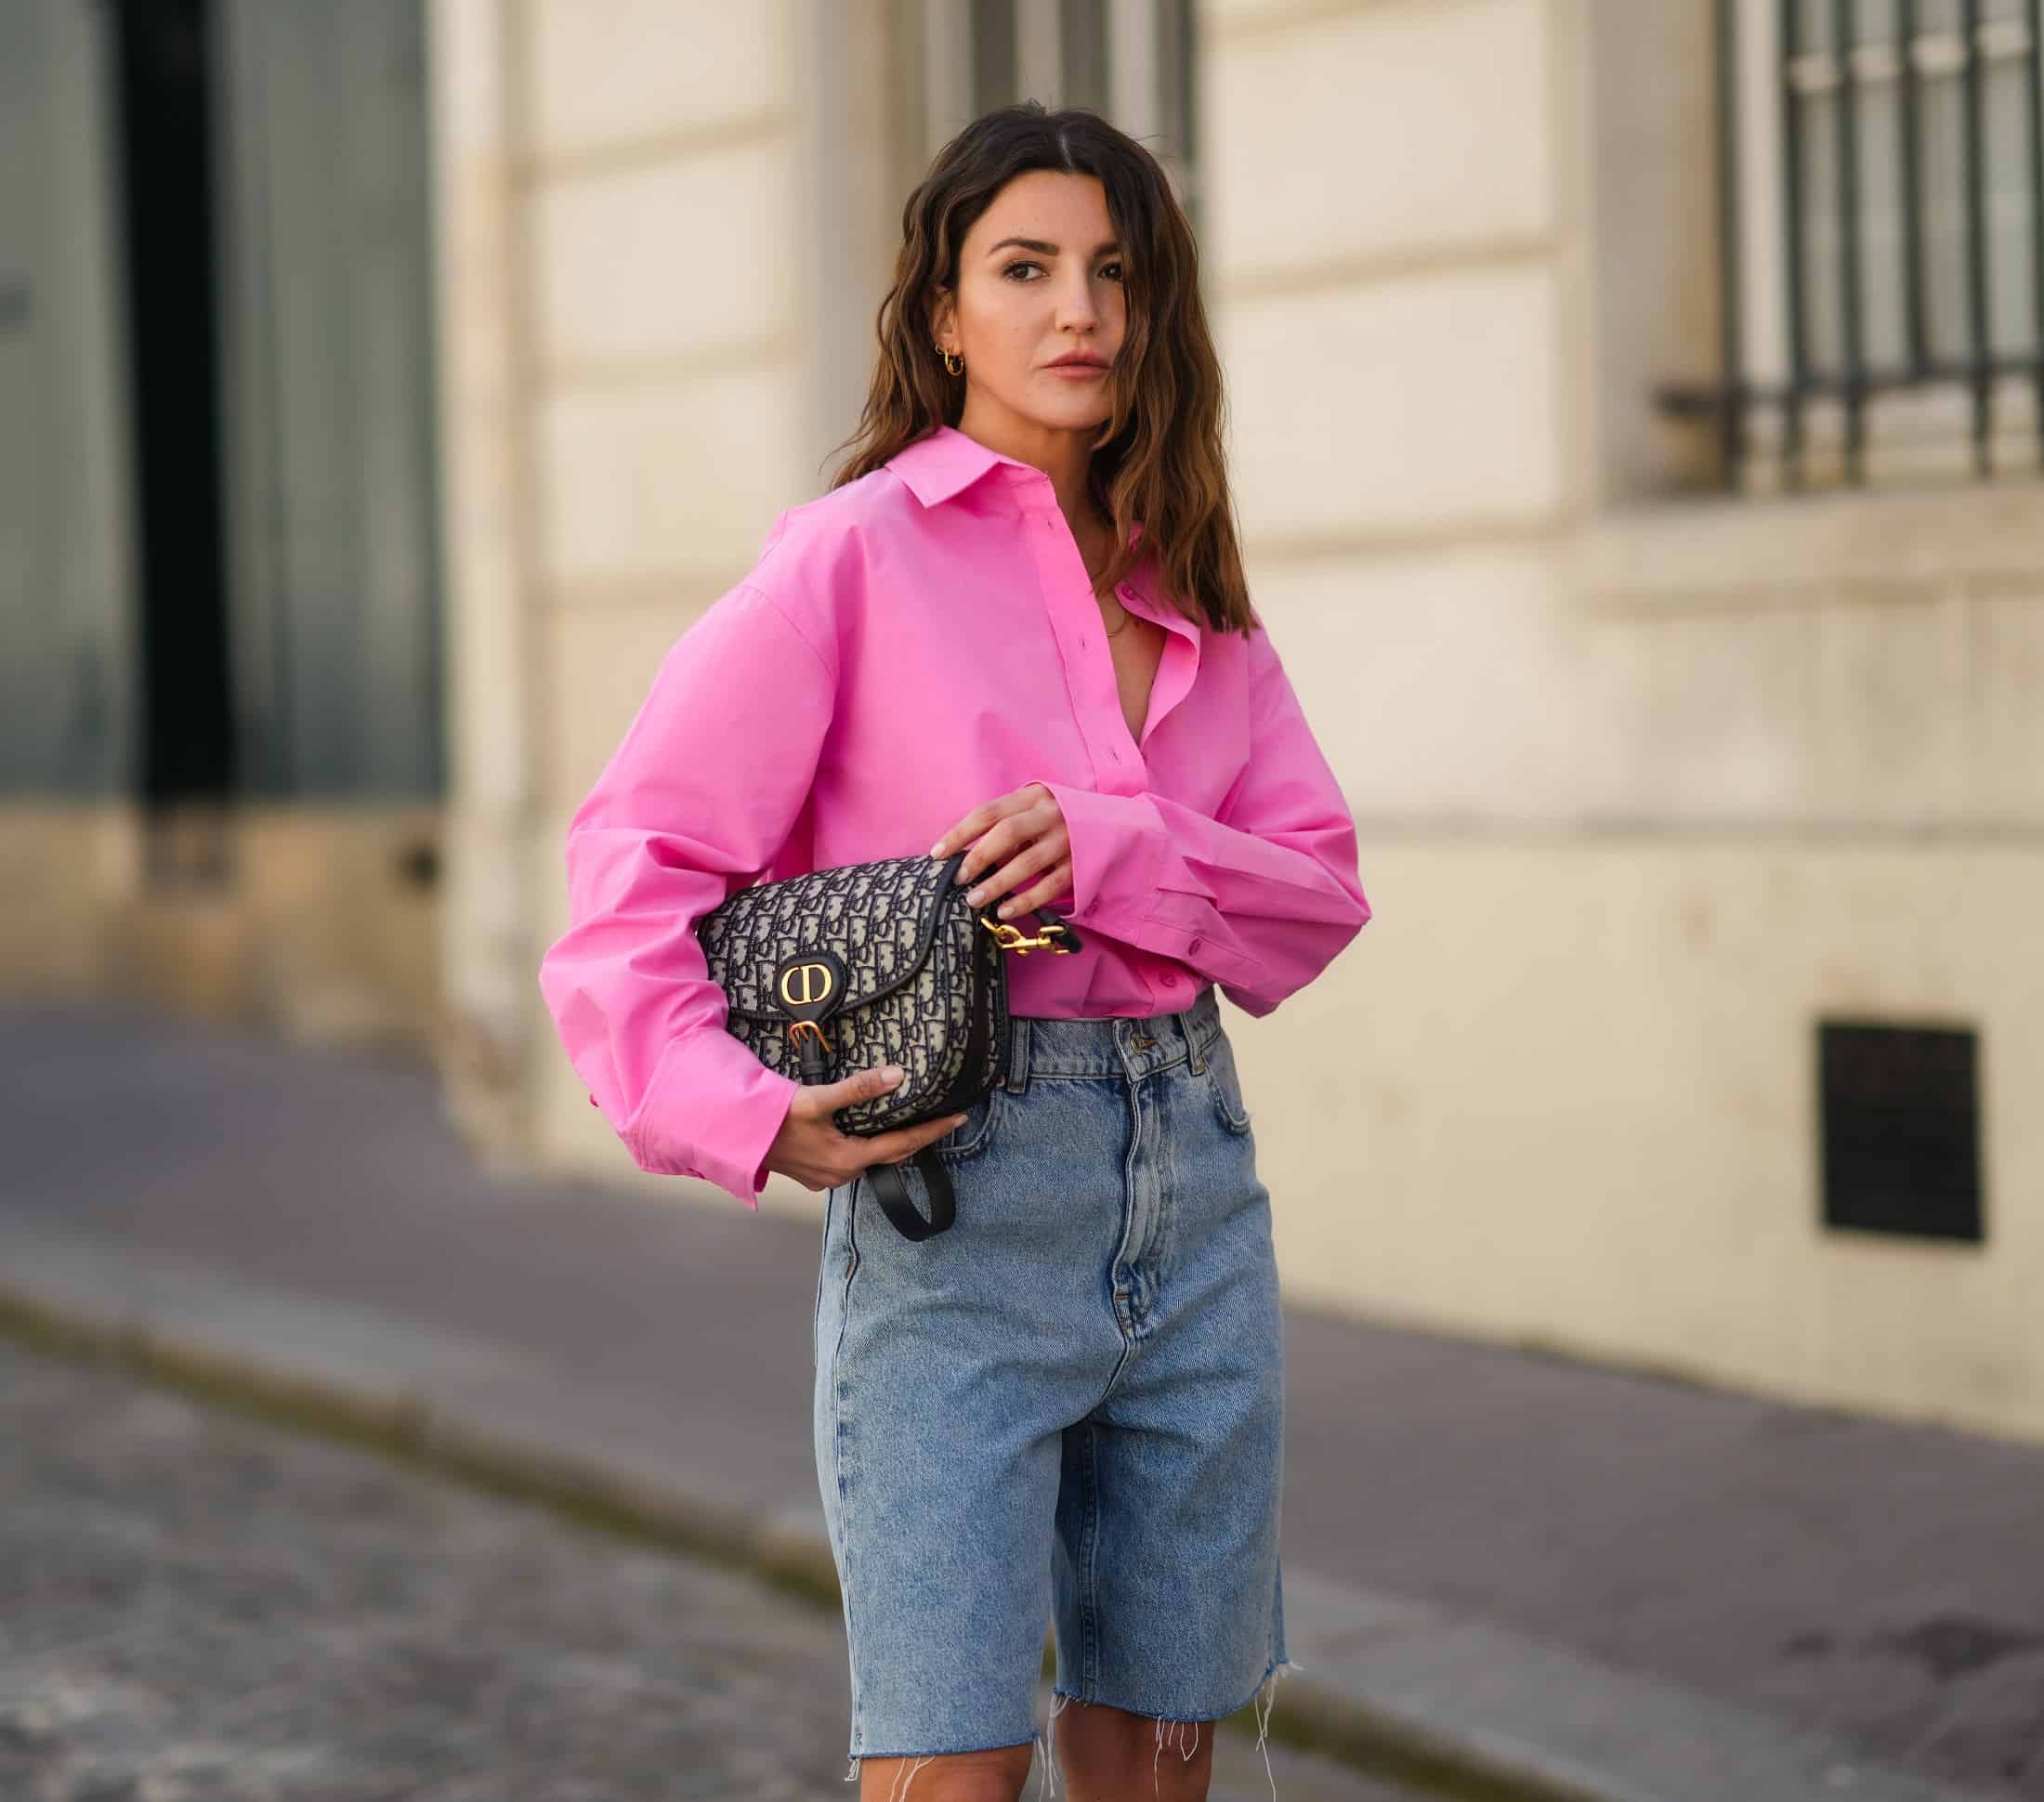 3 models of handbags that every it-girl should have in her closet this spring